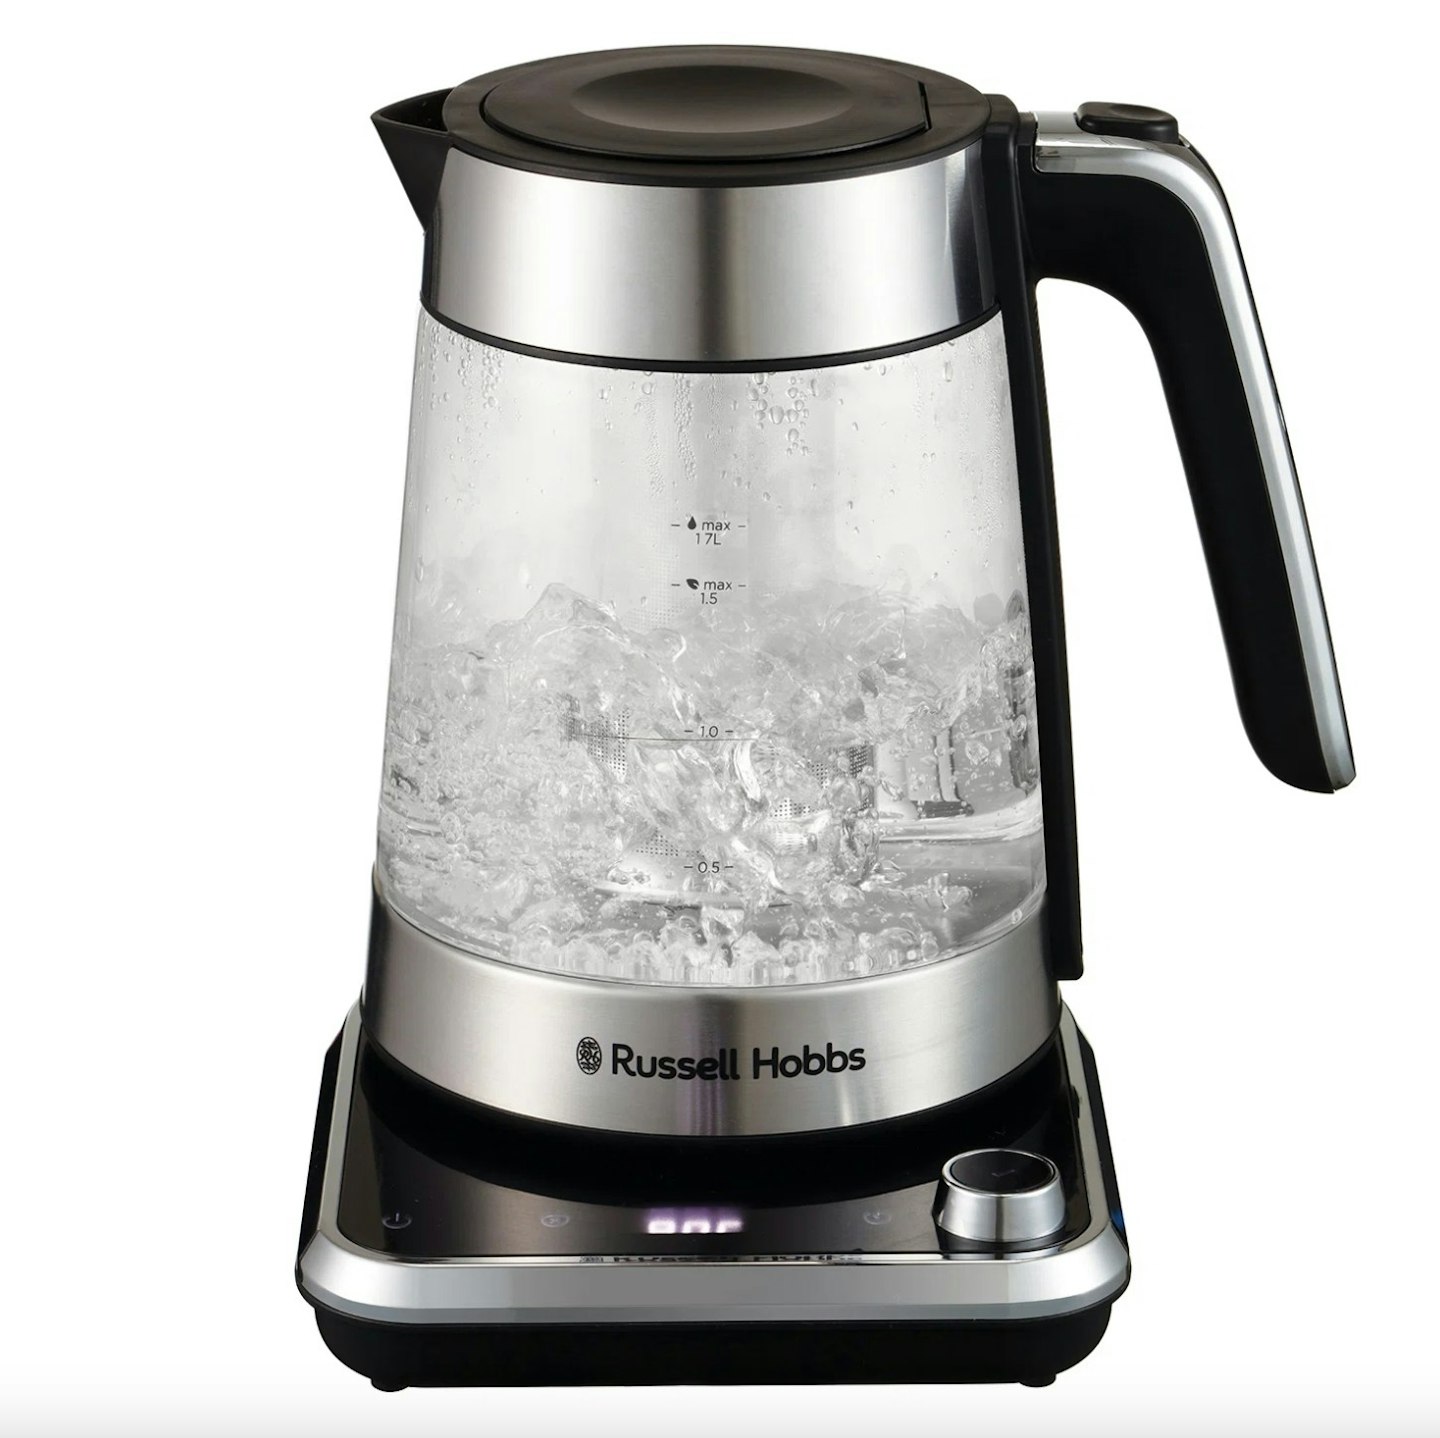 Russell Hobbs Attentiv Variable Temperature Kettle 40-100°C With Touch Screen Controls